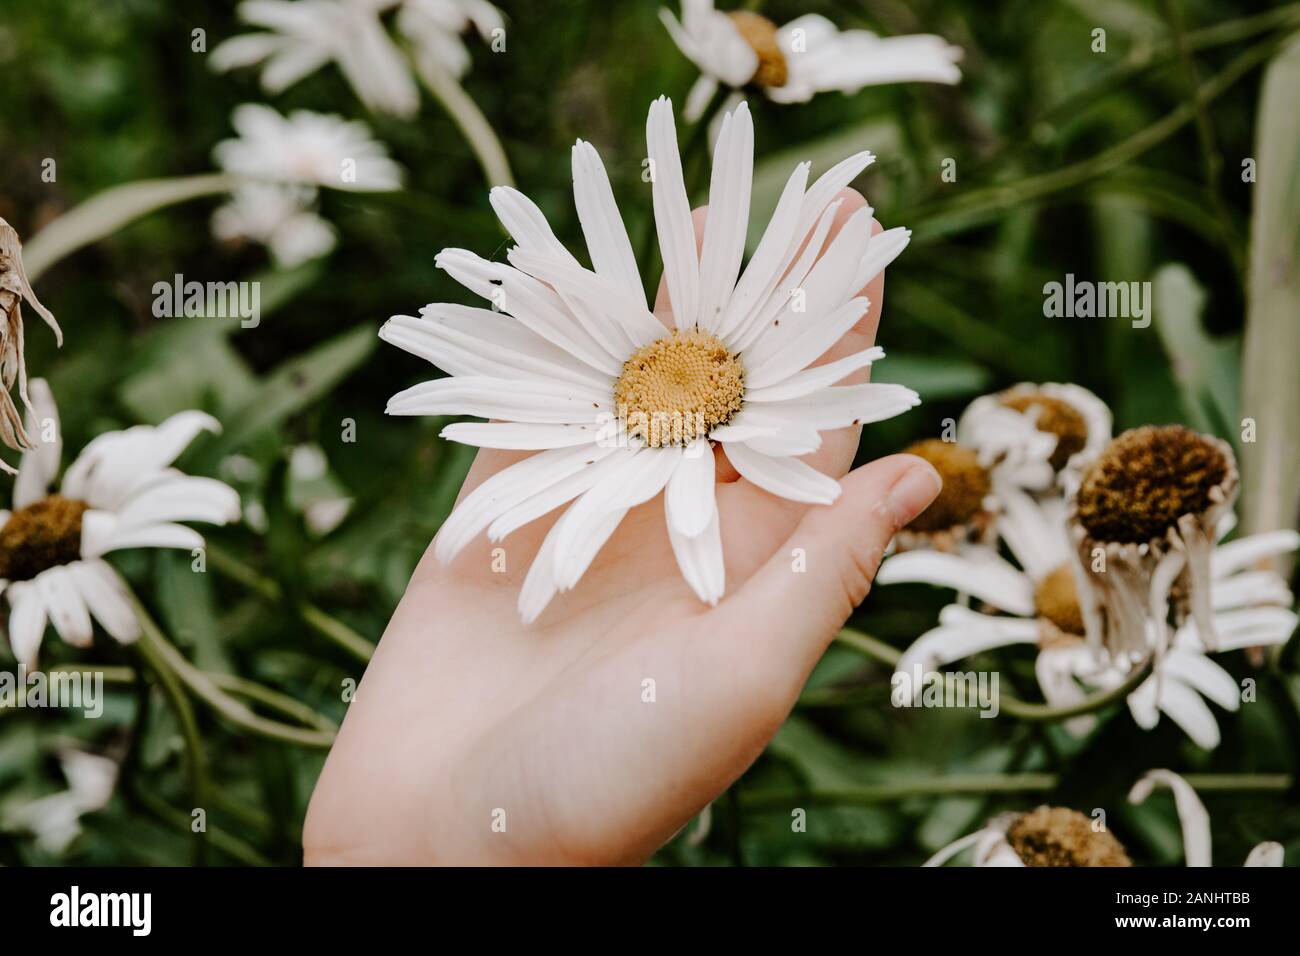 Single white daisy flower, spring concept, flowers, delicate, natural nature beautiful perfect perfection pretty hand holding Stock Photo